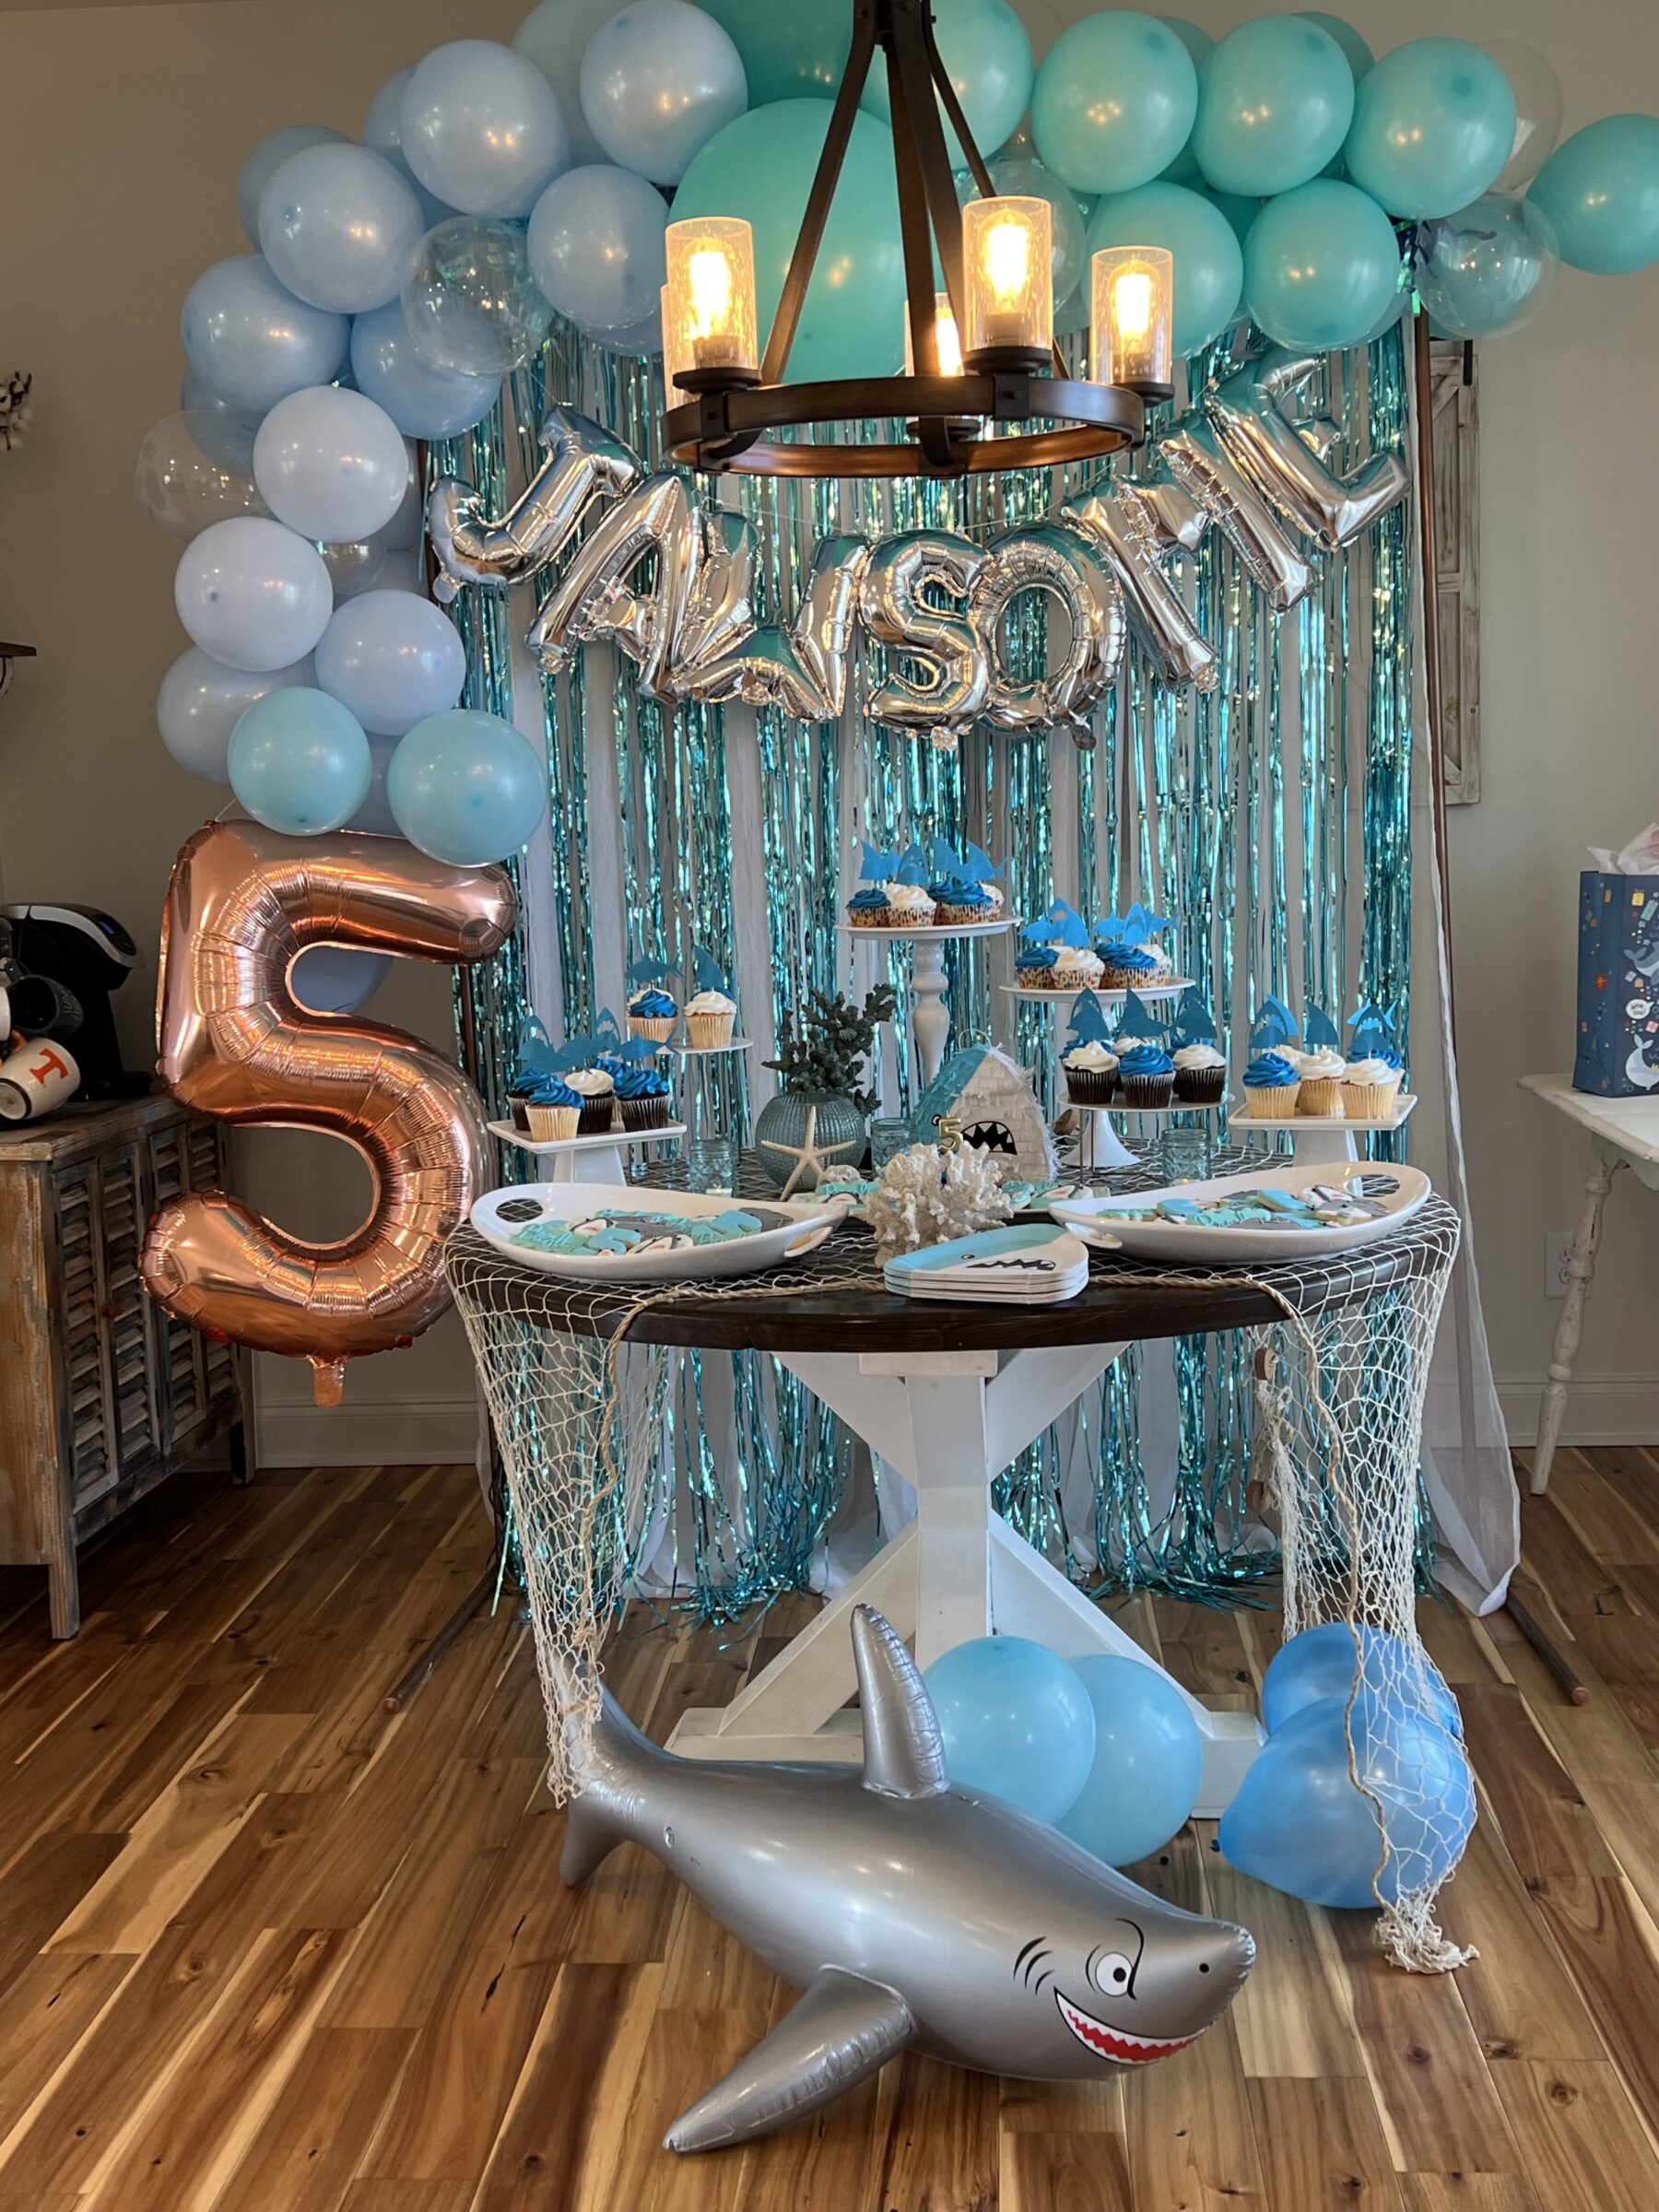 Presley's Jawsome Shark Birthday Party from Romance & Rust - Nashville  Baby Guide